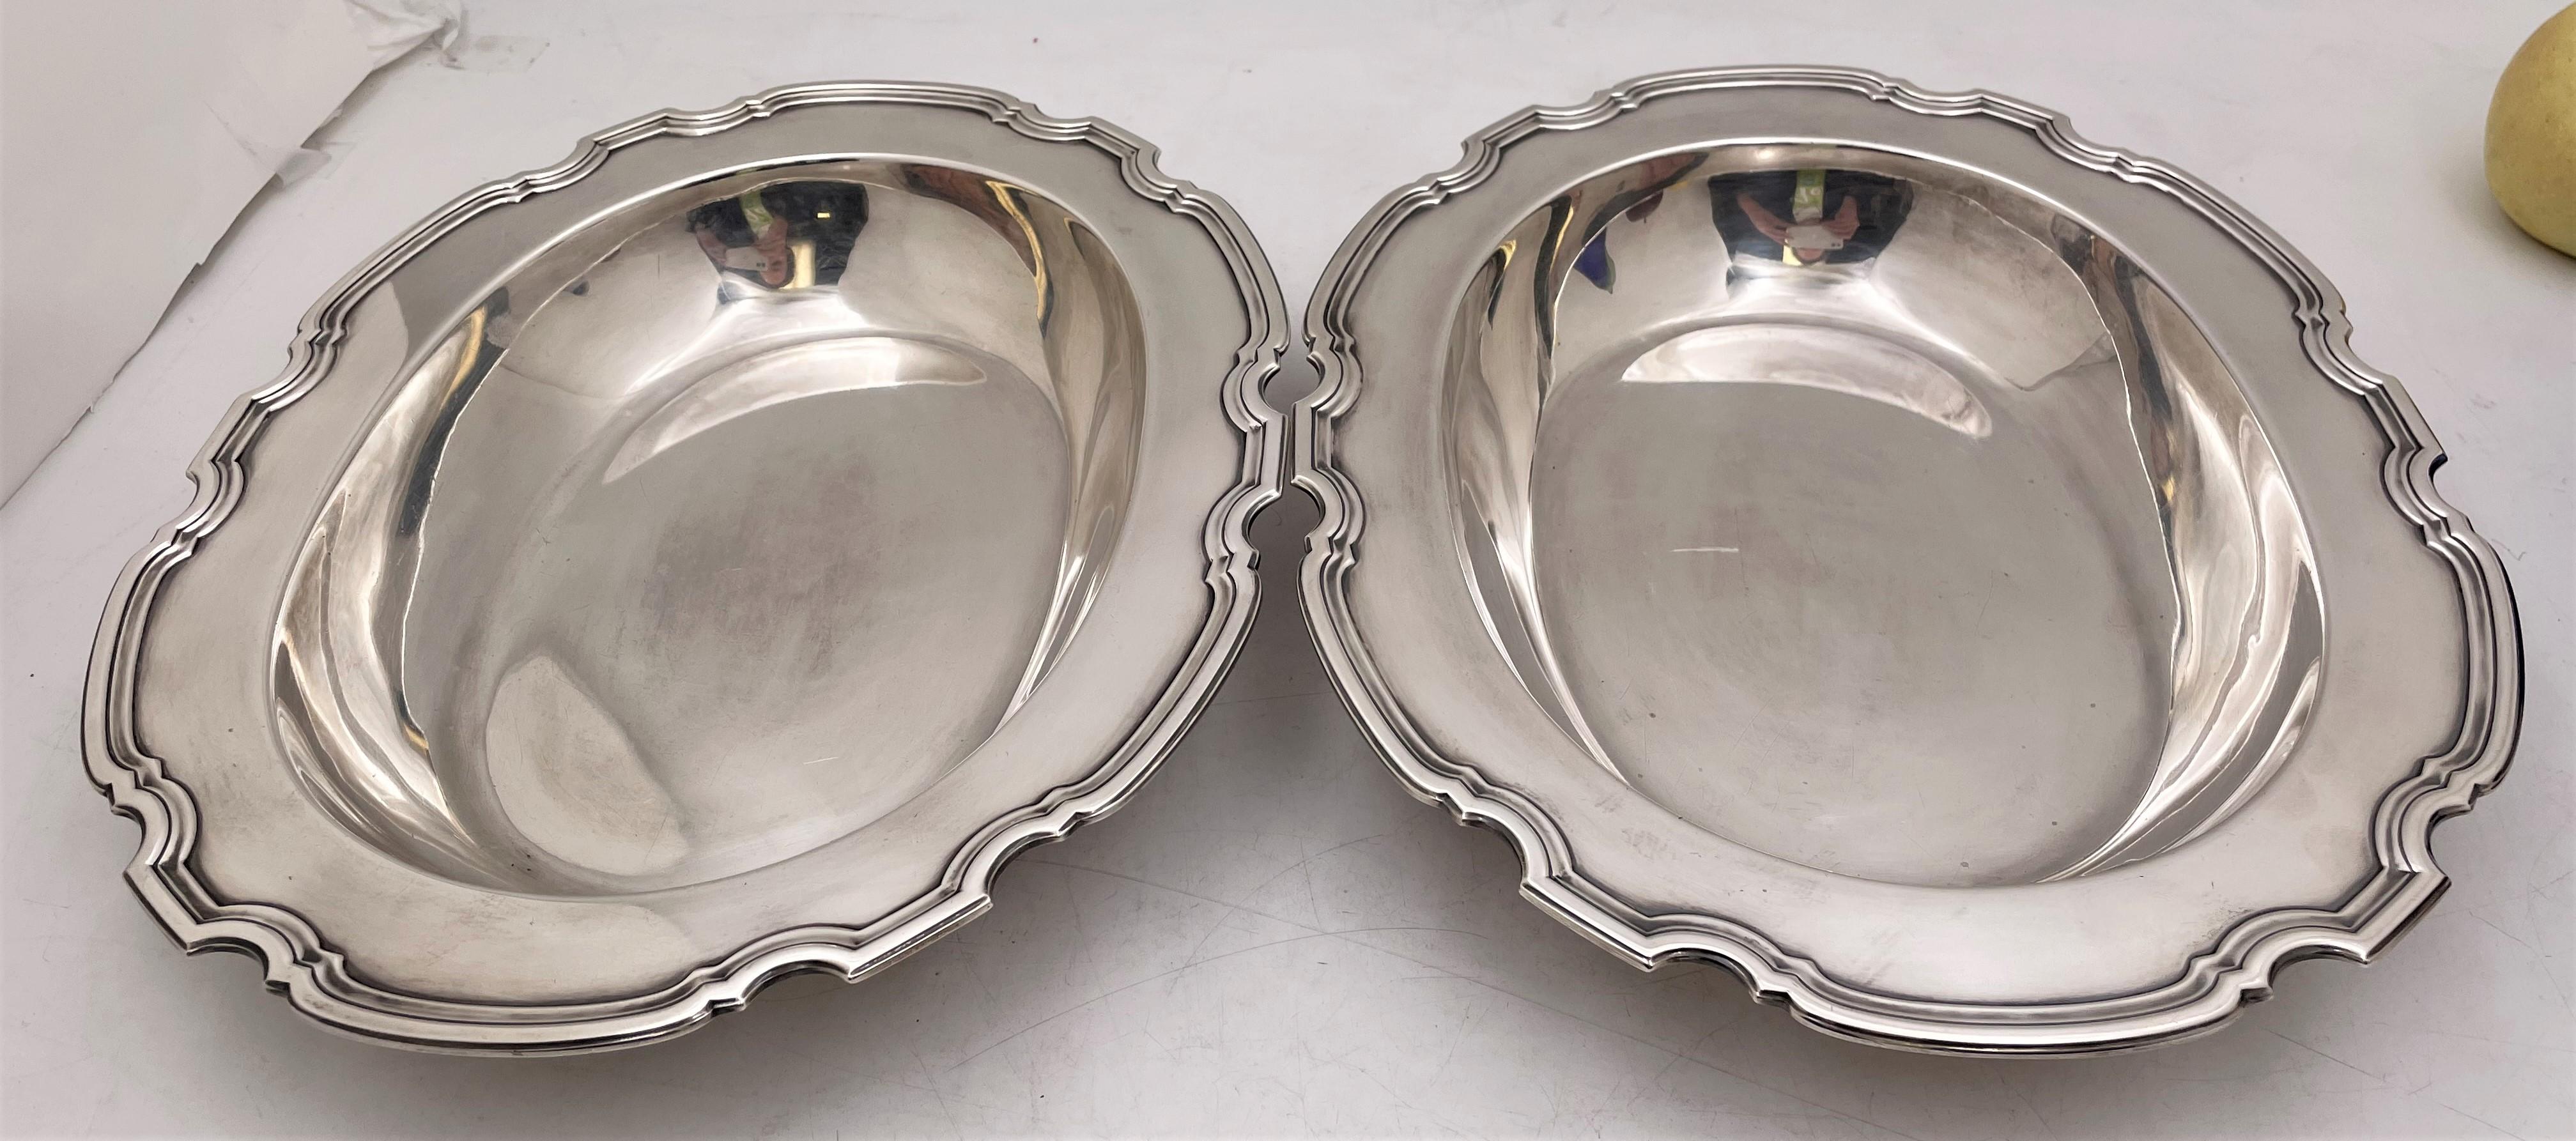 Tiffany & Co., pair of sterling silver vegetables dishes in pattern number 20346 from 1924, possibly in the Hampton pattern, and in Art Deco style with a wide-shaped, geometrically inclined, curvilinear rim. Each measures 11 1/2'' in length by 9